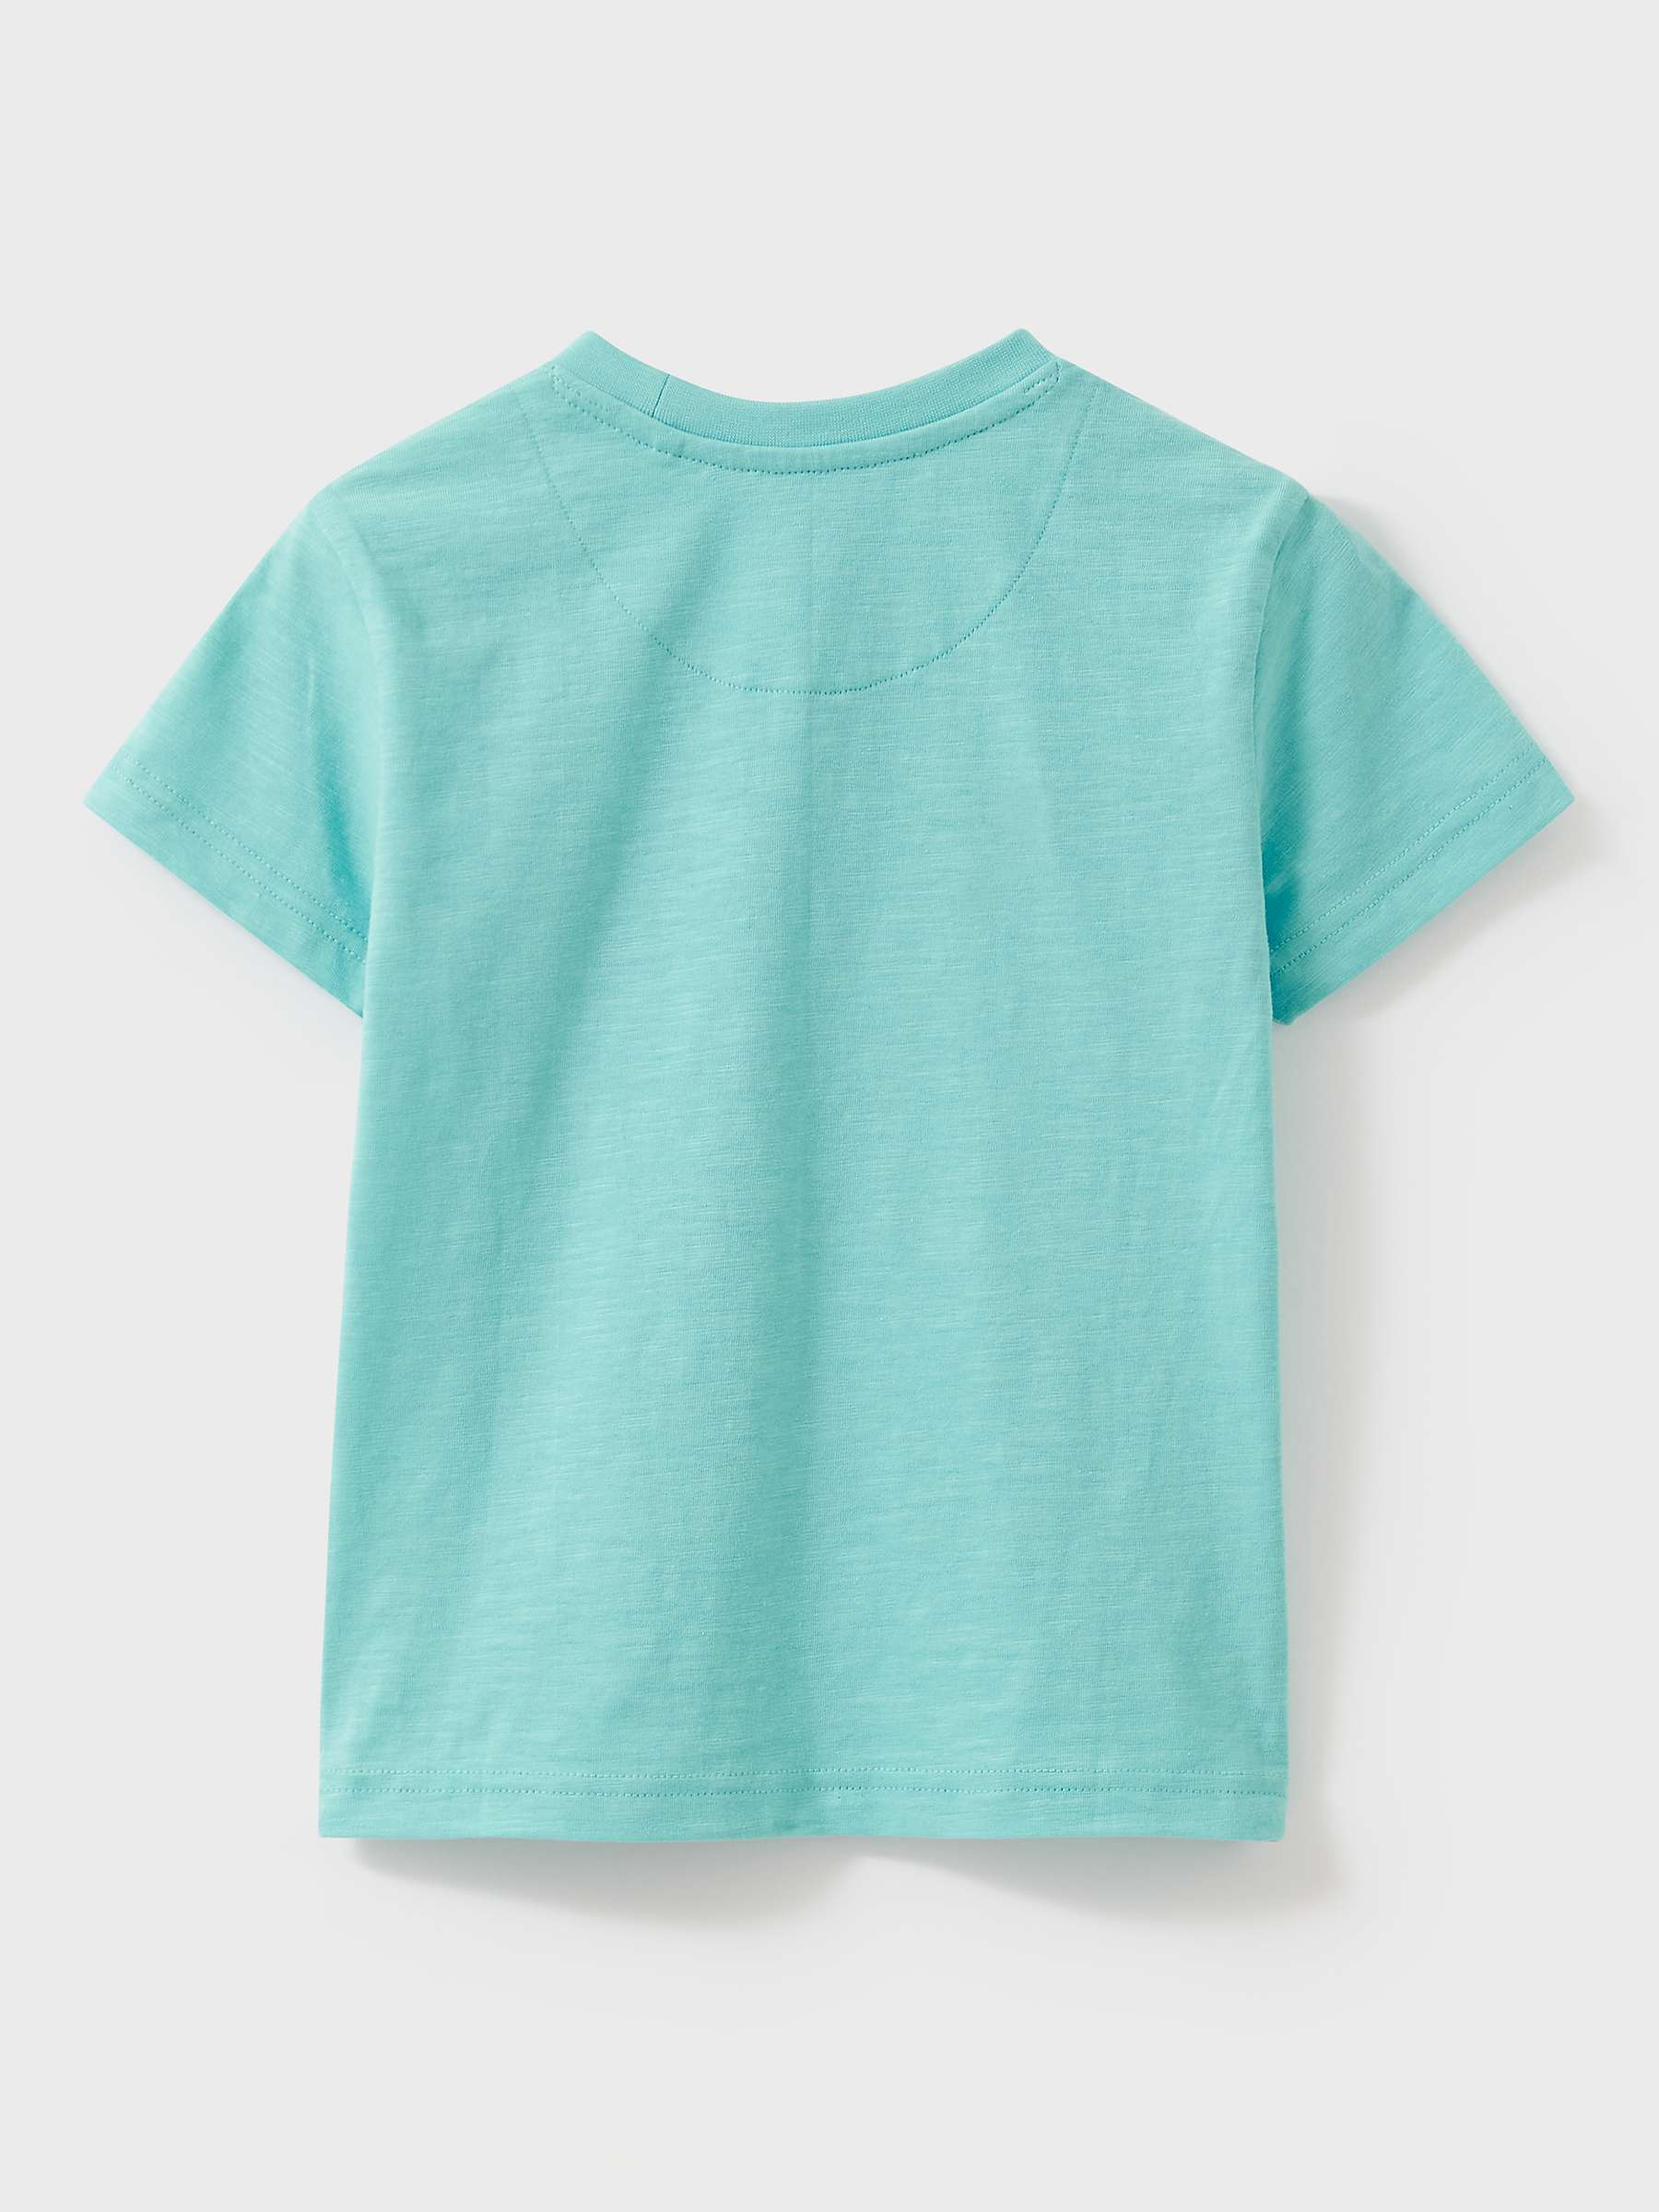 Buy Crew Clothing Kids' Surfer's Bay T-Shirt, Turquoise Online at johnlewis.com